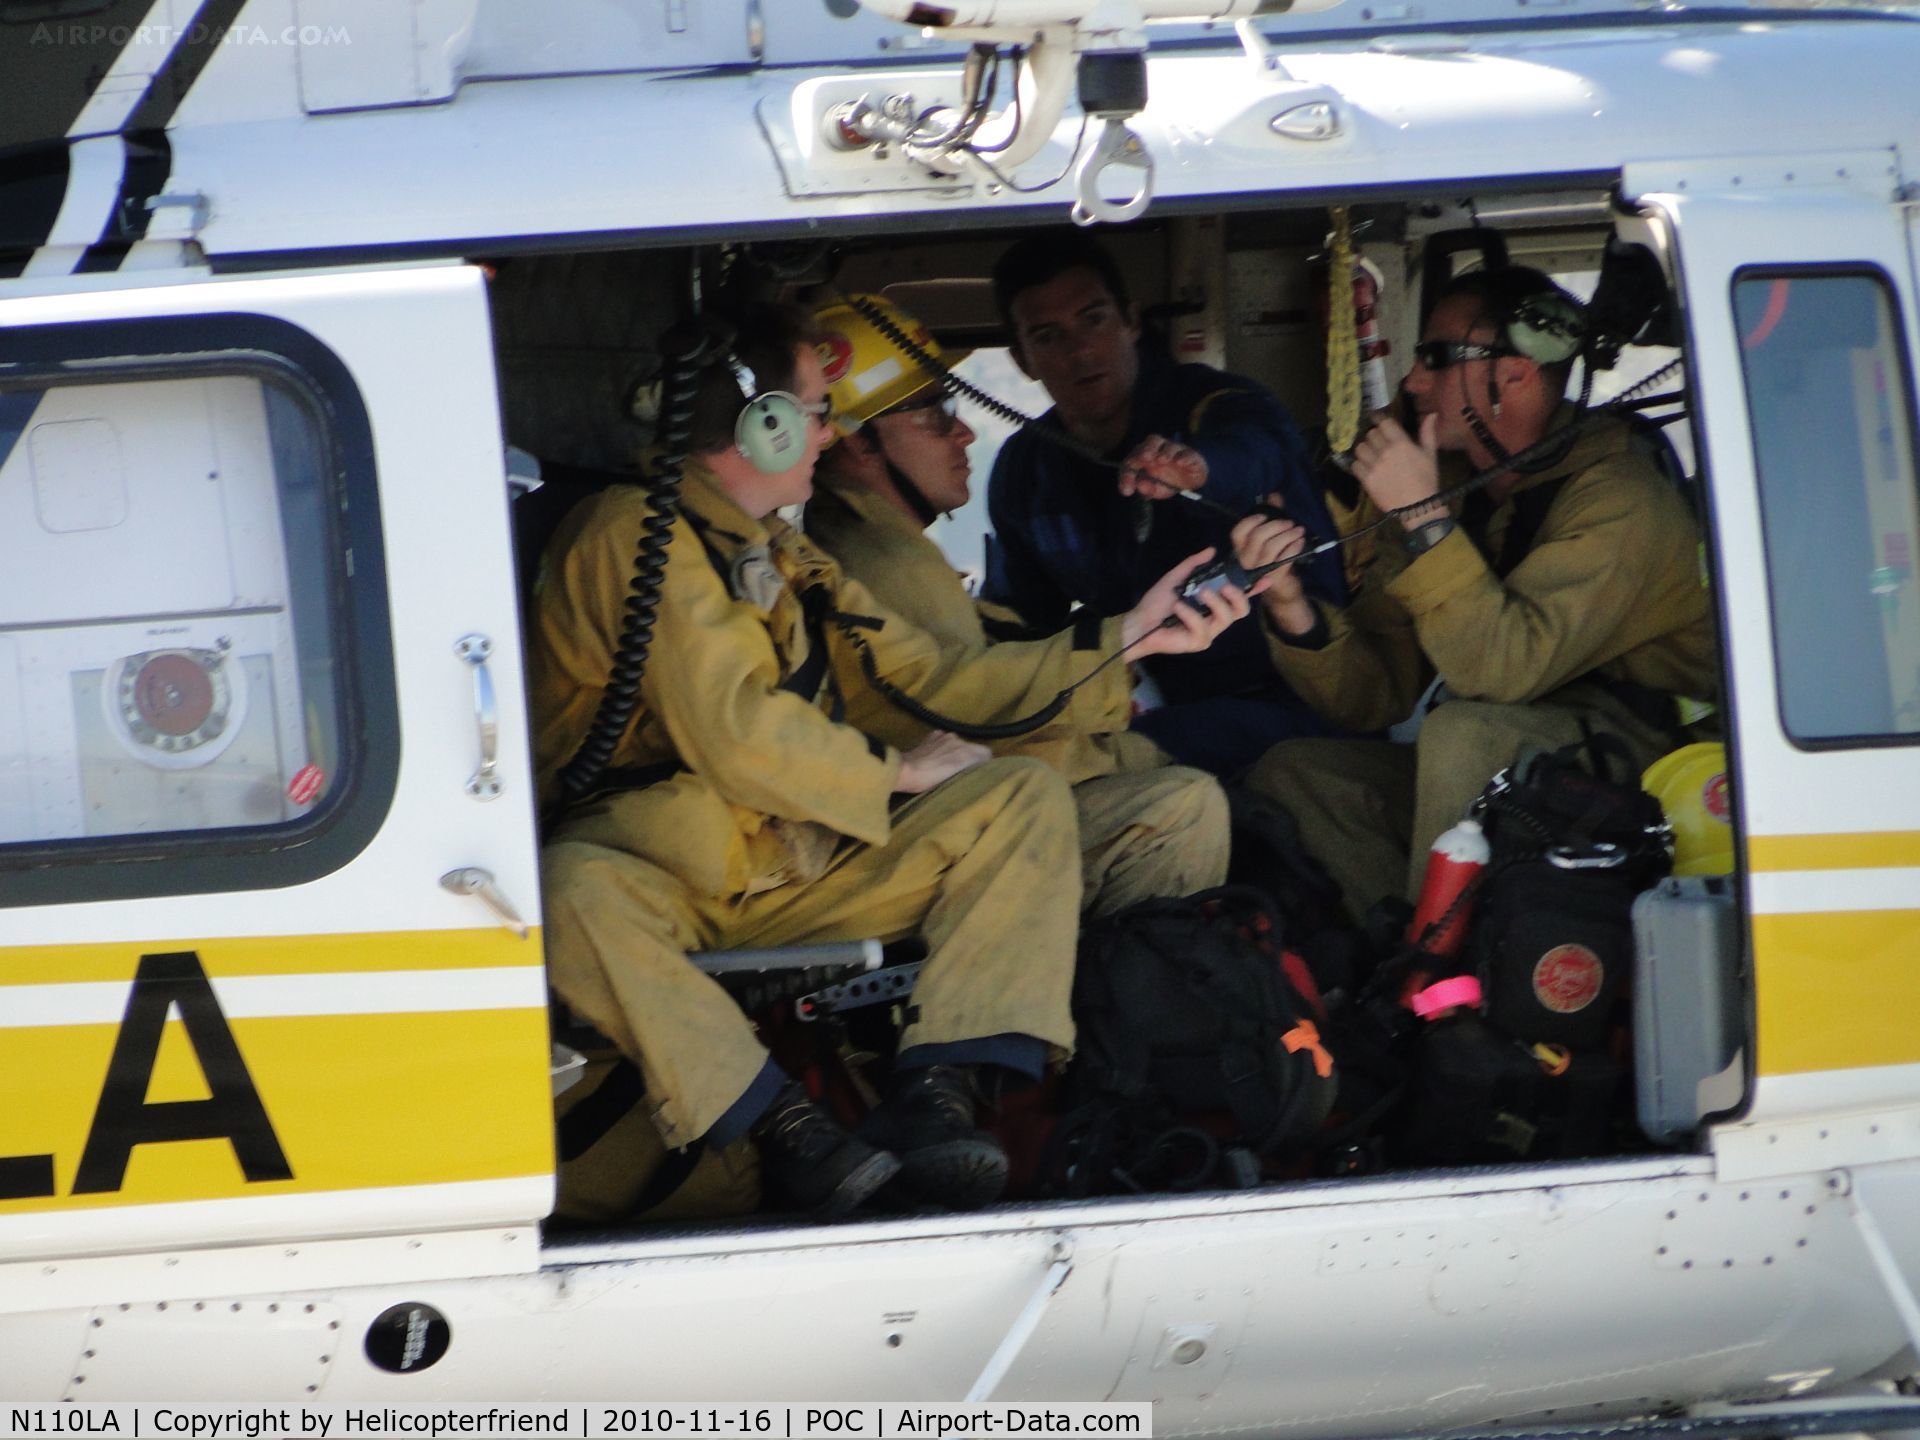 N110LA, 2005 Bell 412EP C/N 36392, Helicopter crew member showing firefighters how to use the radio